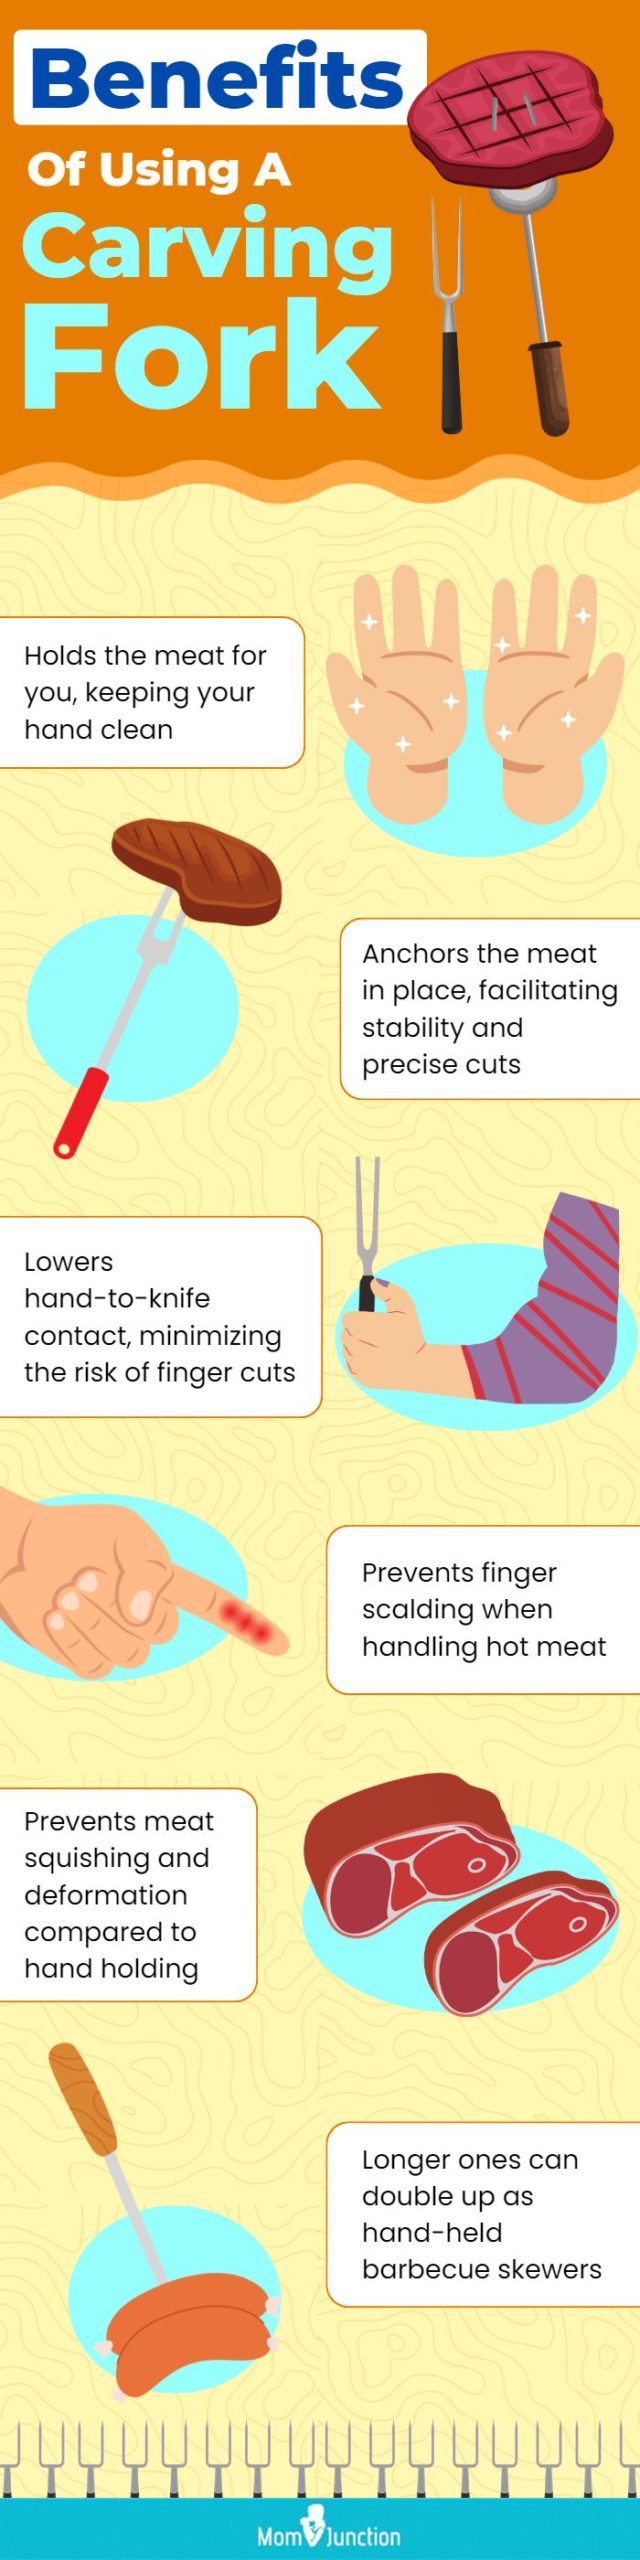 Benefits Of Using A Carving Fork (infographic)